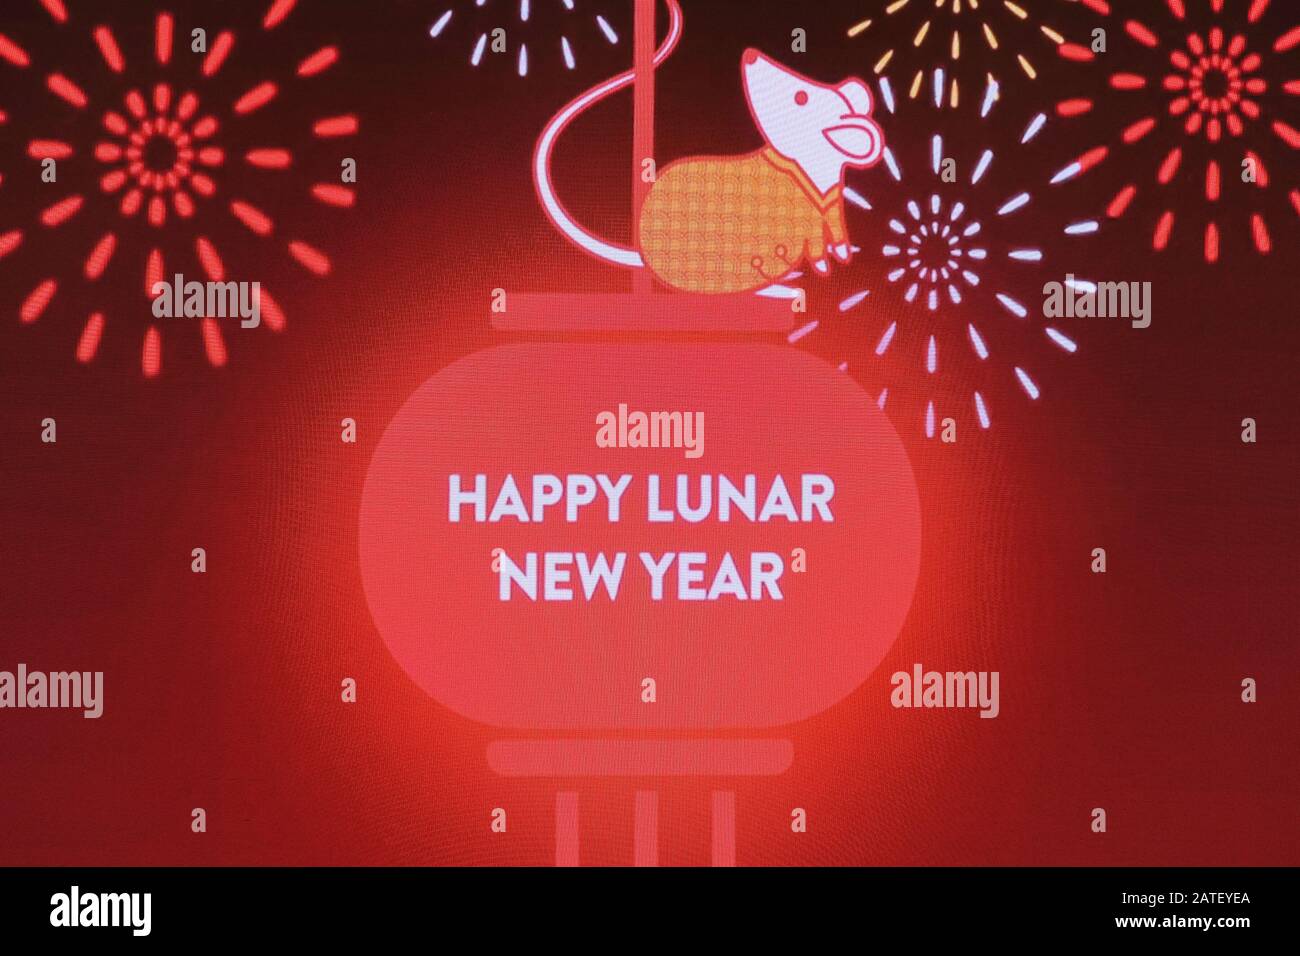 Happy Lunar New Year, Year of the Rat, 2020 Stock Photo